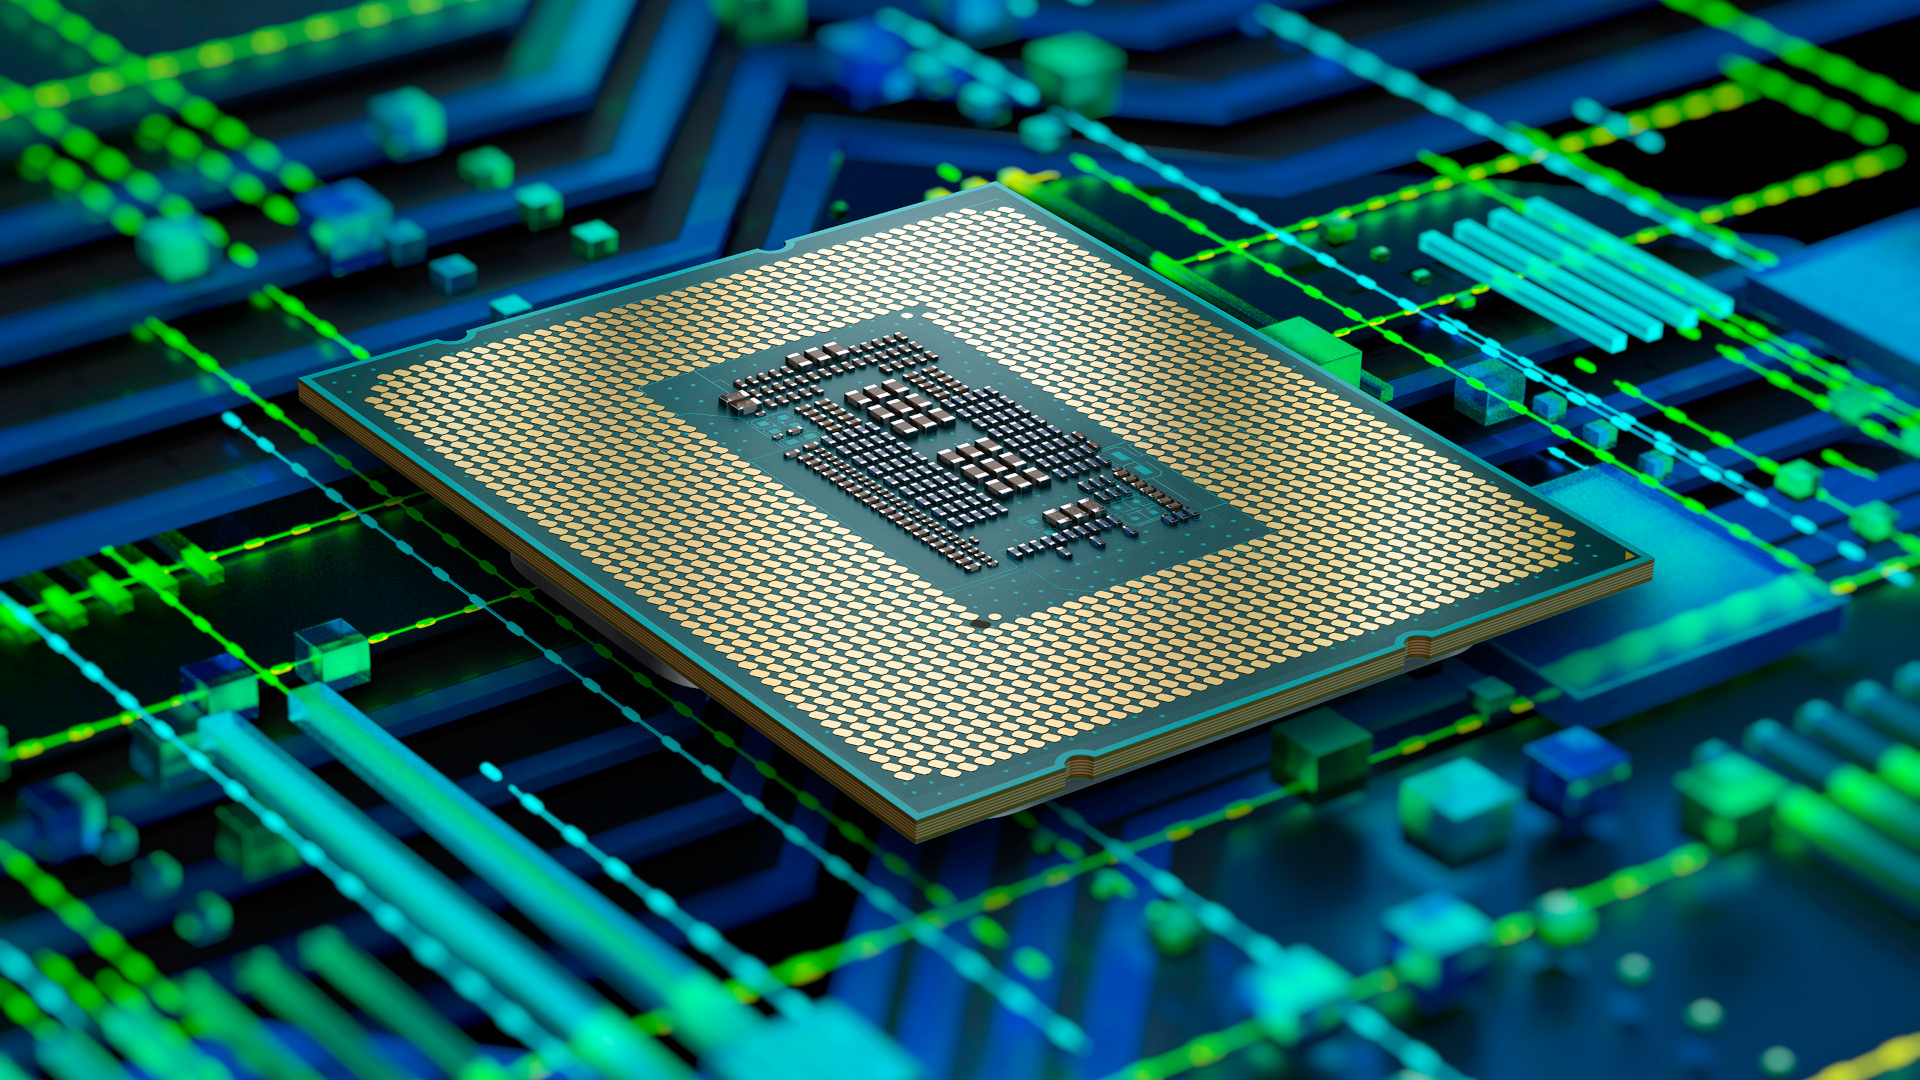 what is a cpu - an image of a standard processor from Intel